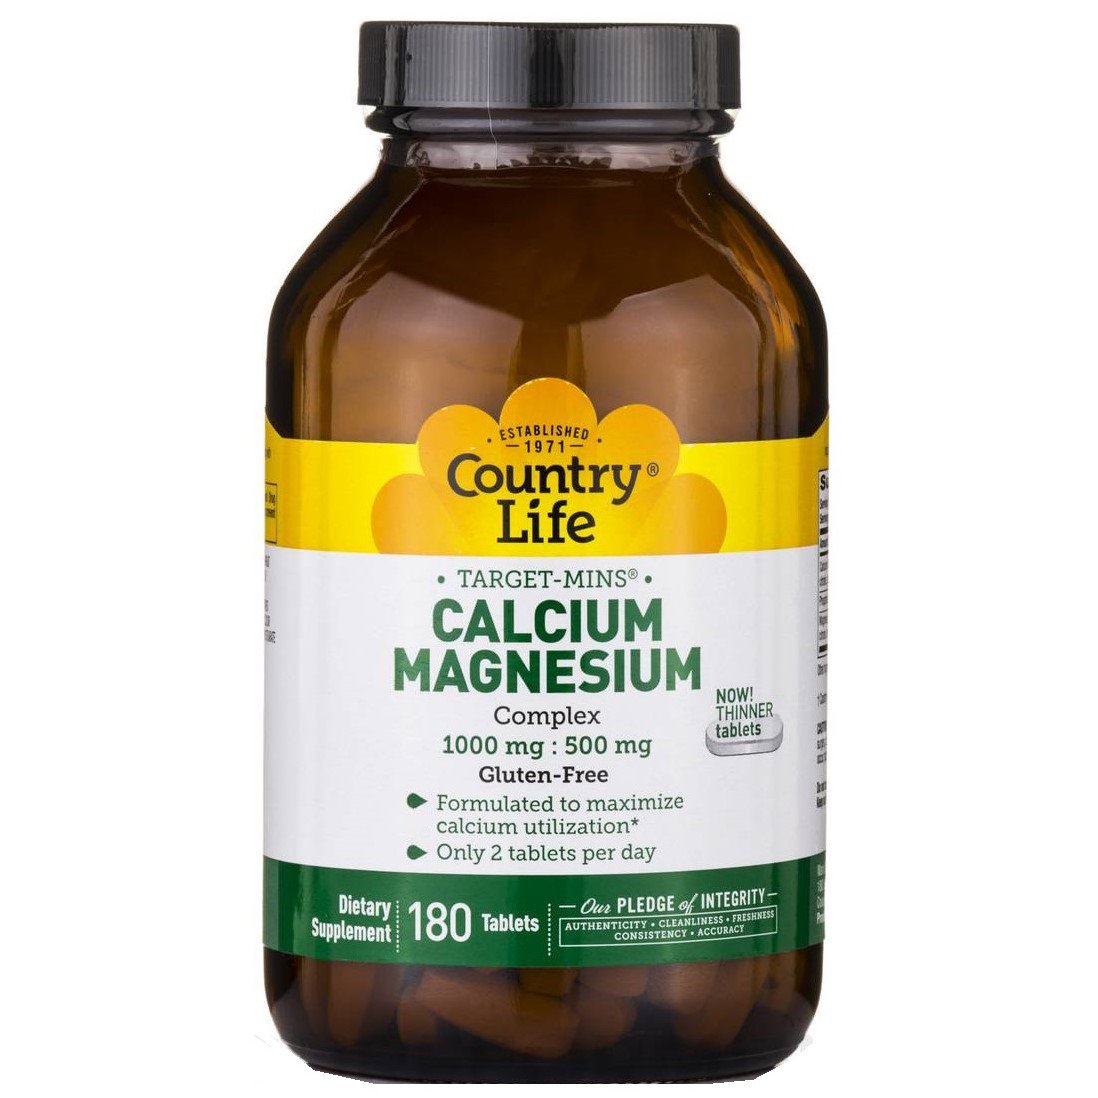 Country Life Target-Mins Calcium Magnesium Complex 90 tablets